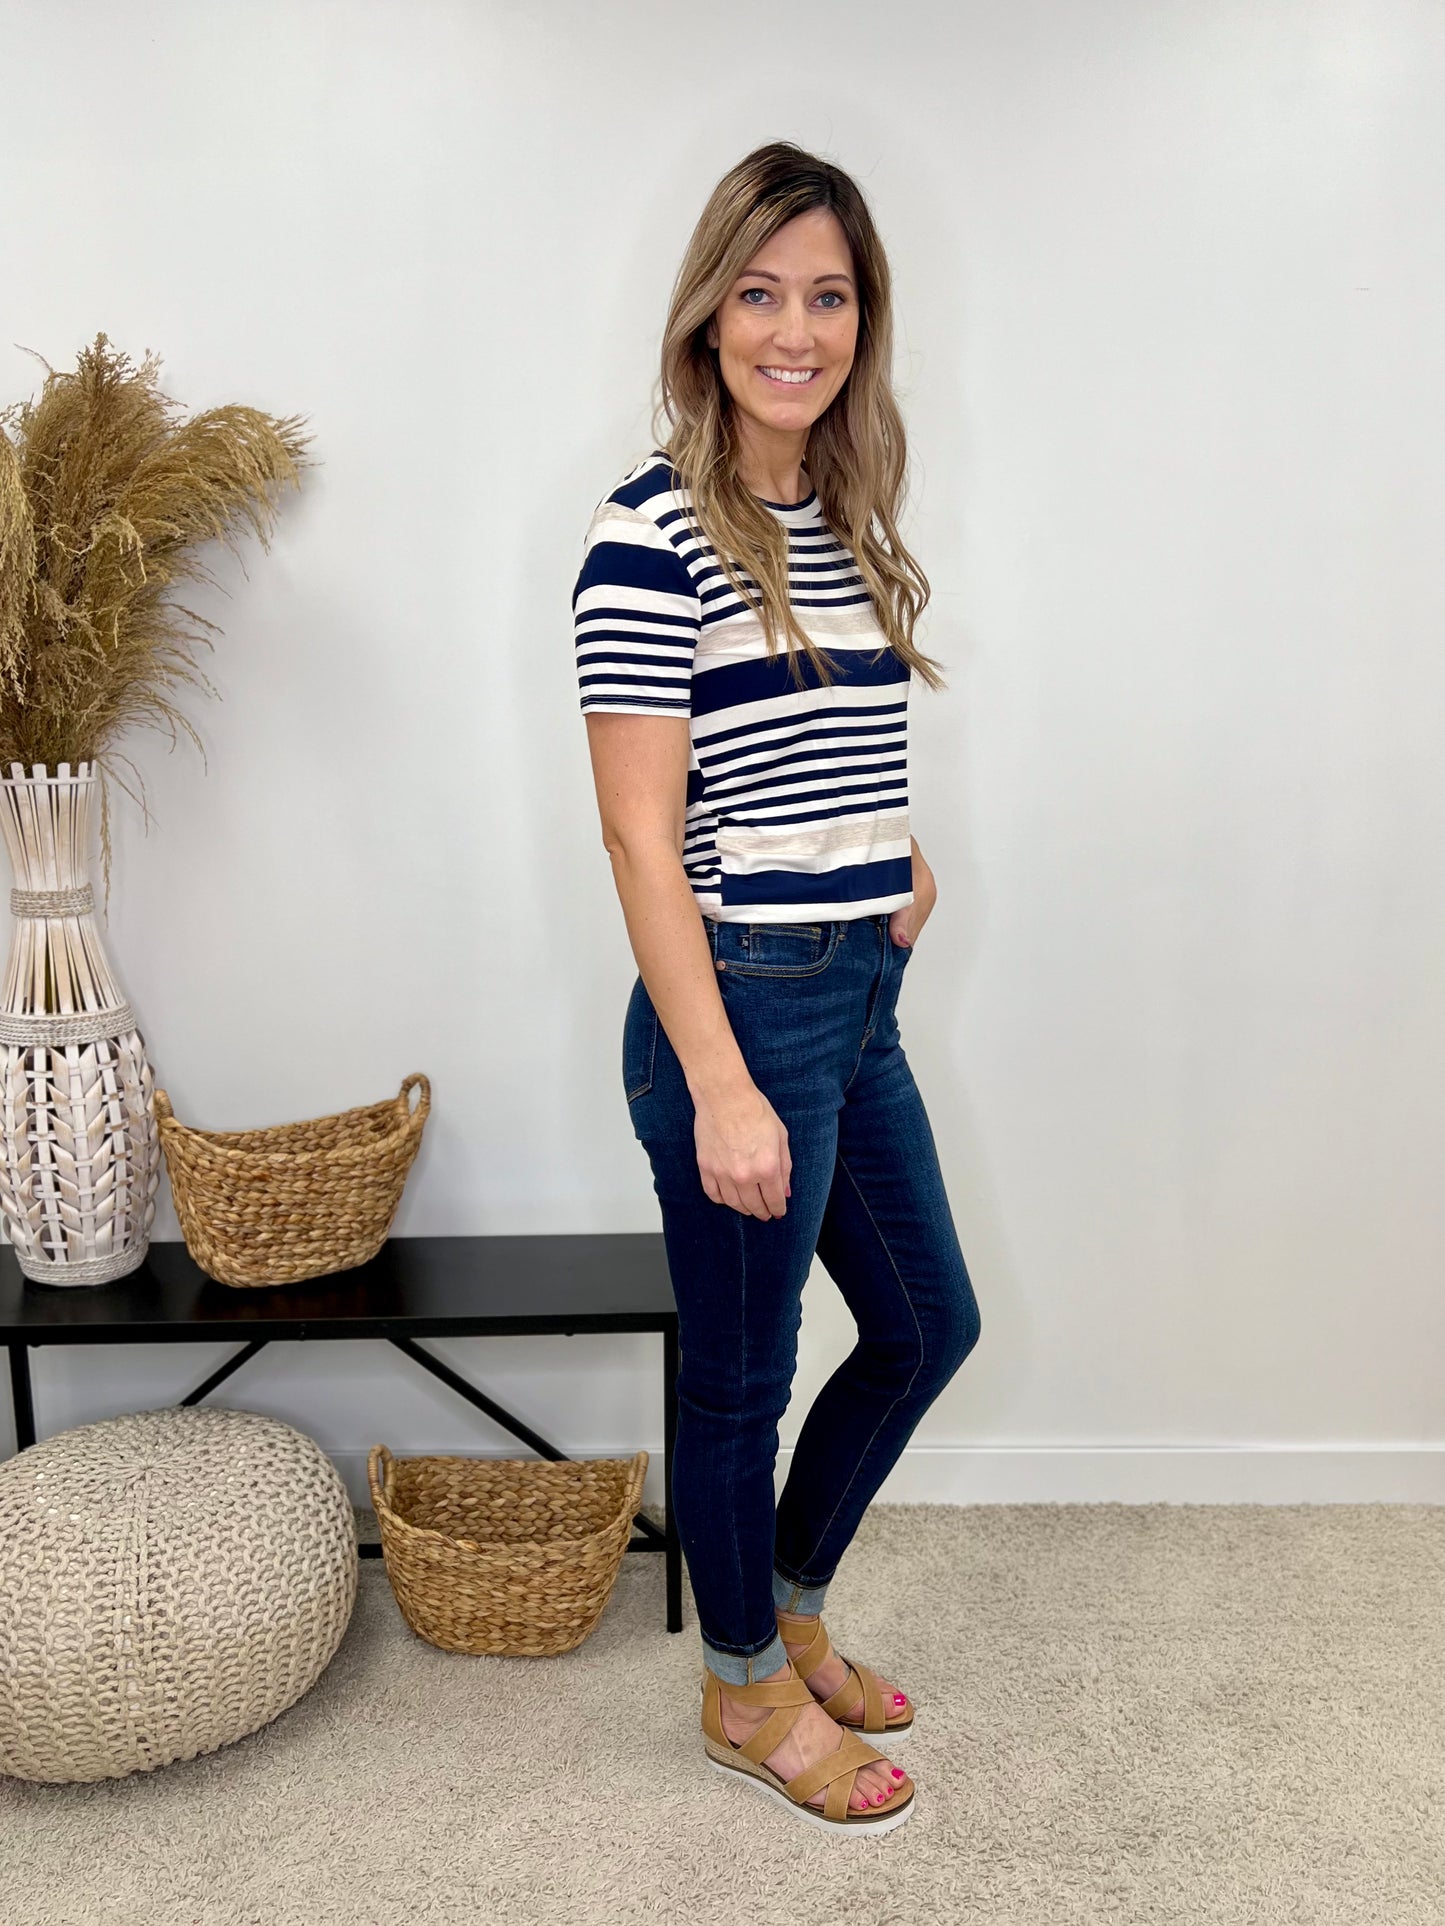 The Dayana Striped Top